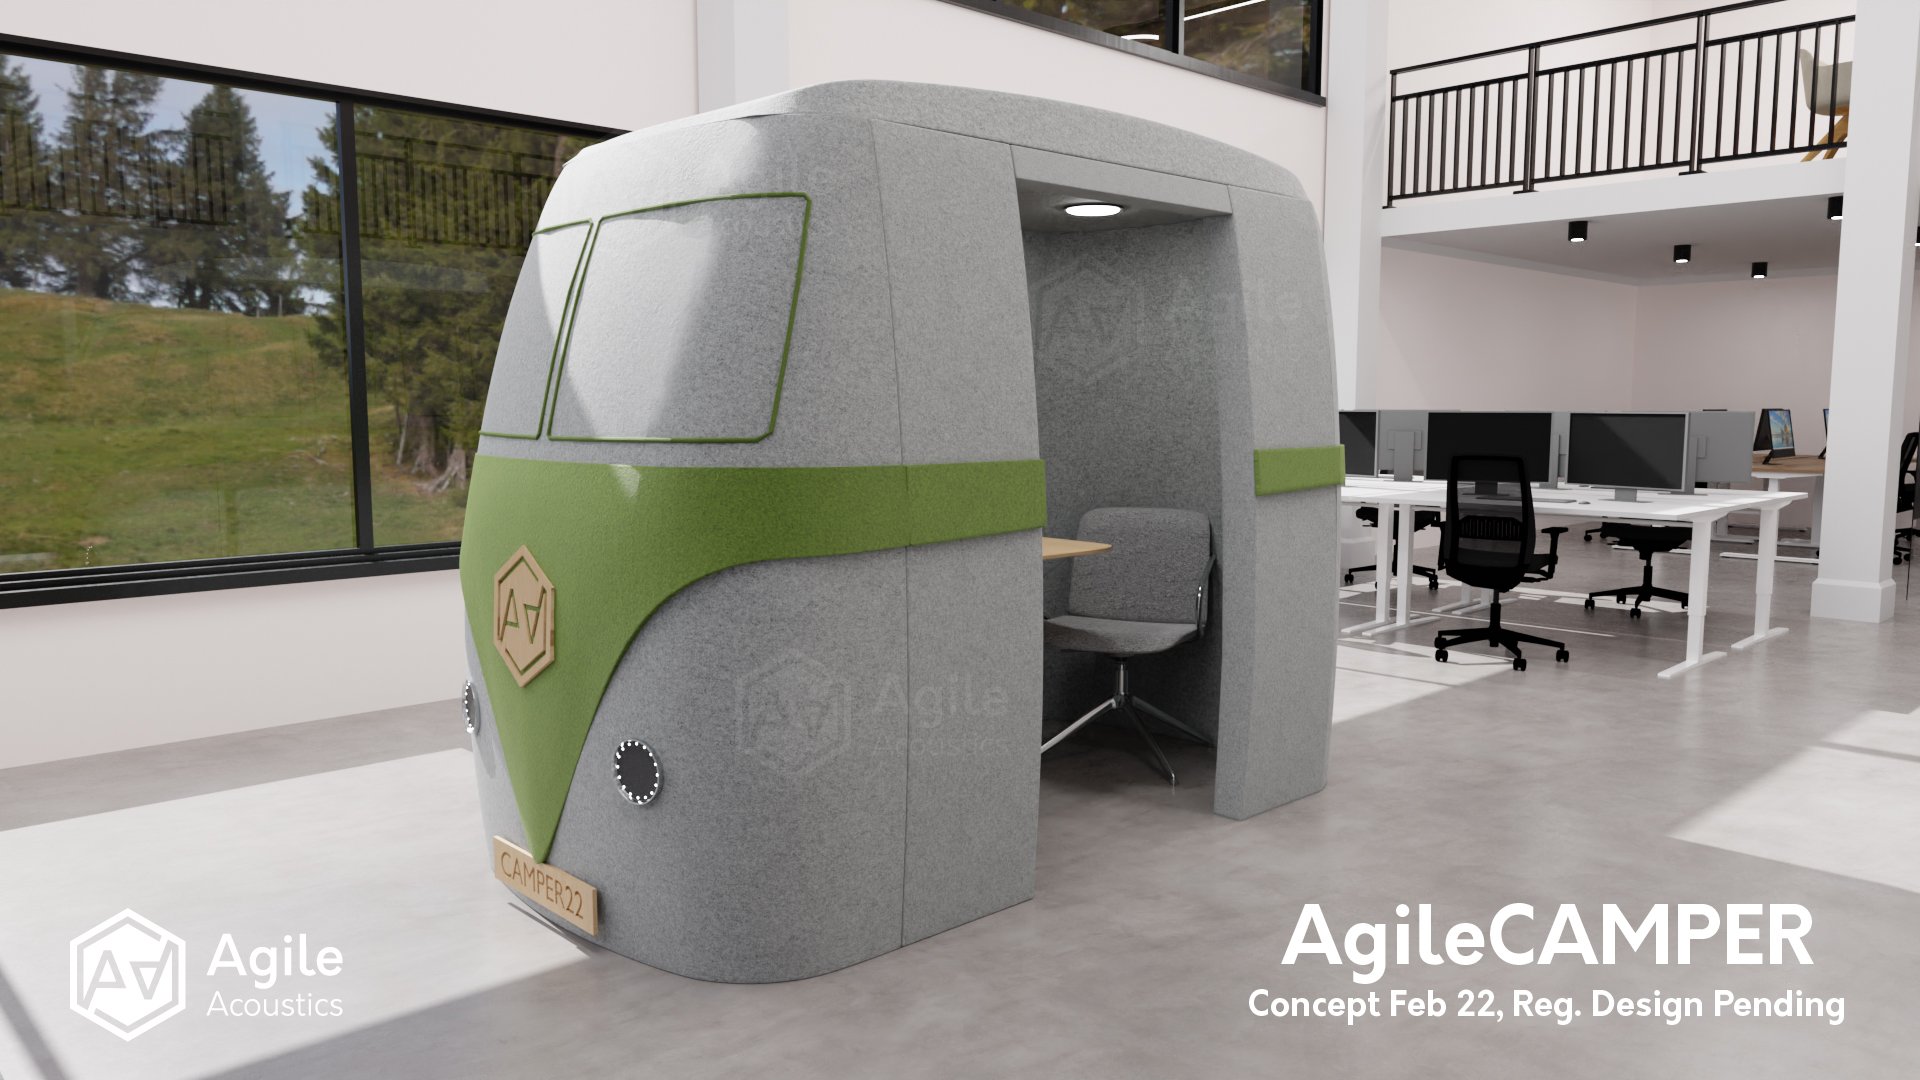 AgileCAMPER Acoustic Pods: A talking point for your space? — AgileAcoustics